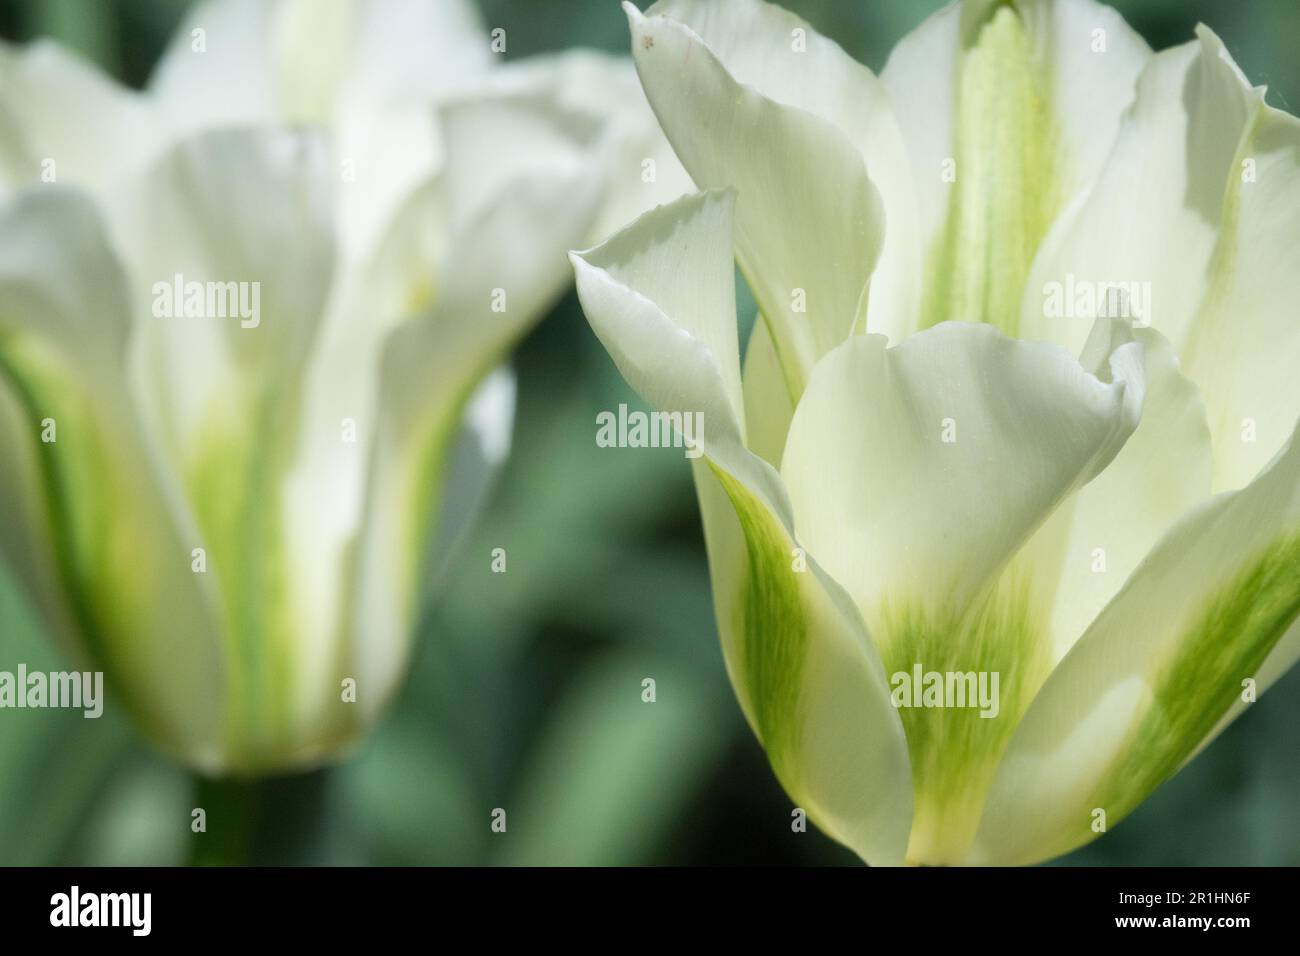 Viridiflora Groupe tulipes 'Spring Green' Tulip White cultivar Tulipa 'Spring Green' Tulipa fleurs en fleurs mai Tulipes blanches fleurs en fleurs Banque D'Images